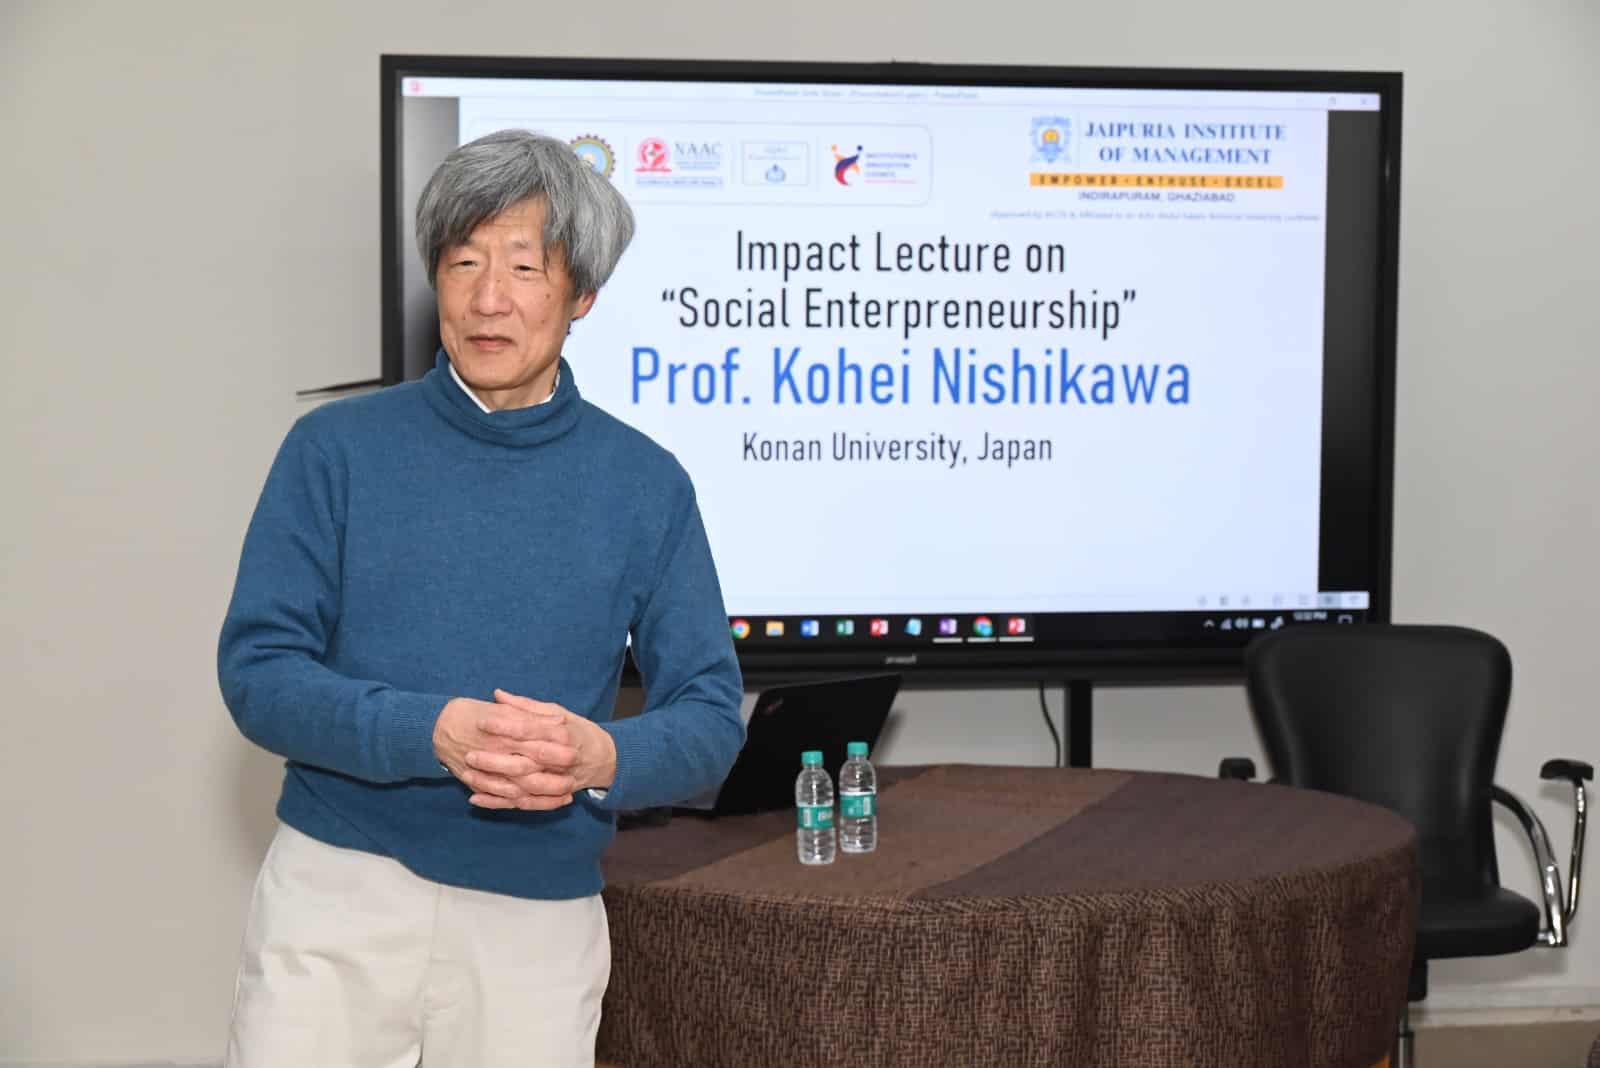 Prof. Kohei Nishikawa stands ready to deliver his impact lecture on Social Entrepreneurship at Jaipuria Institute of Management.